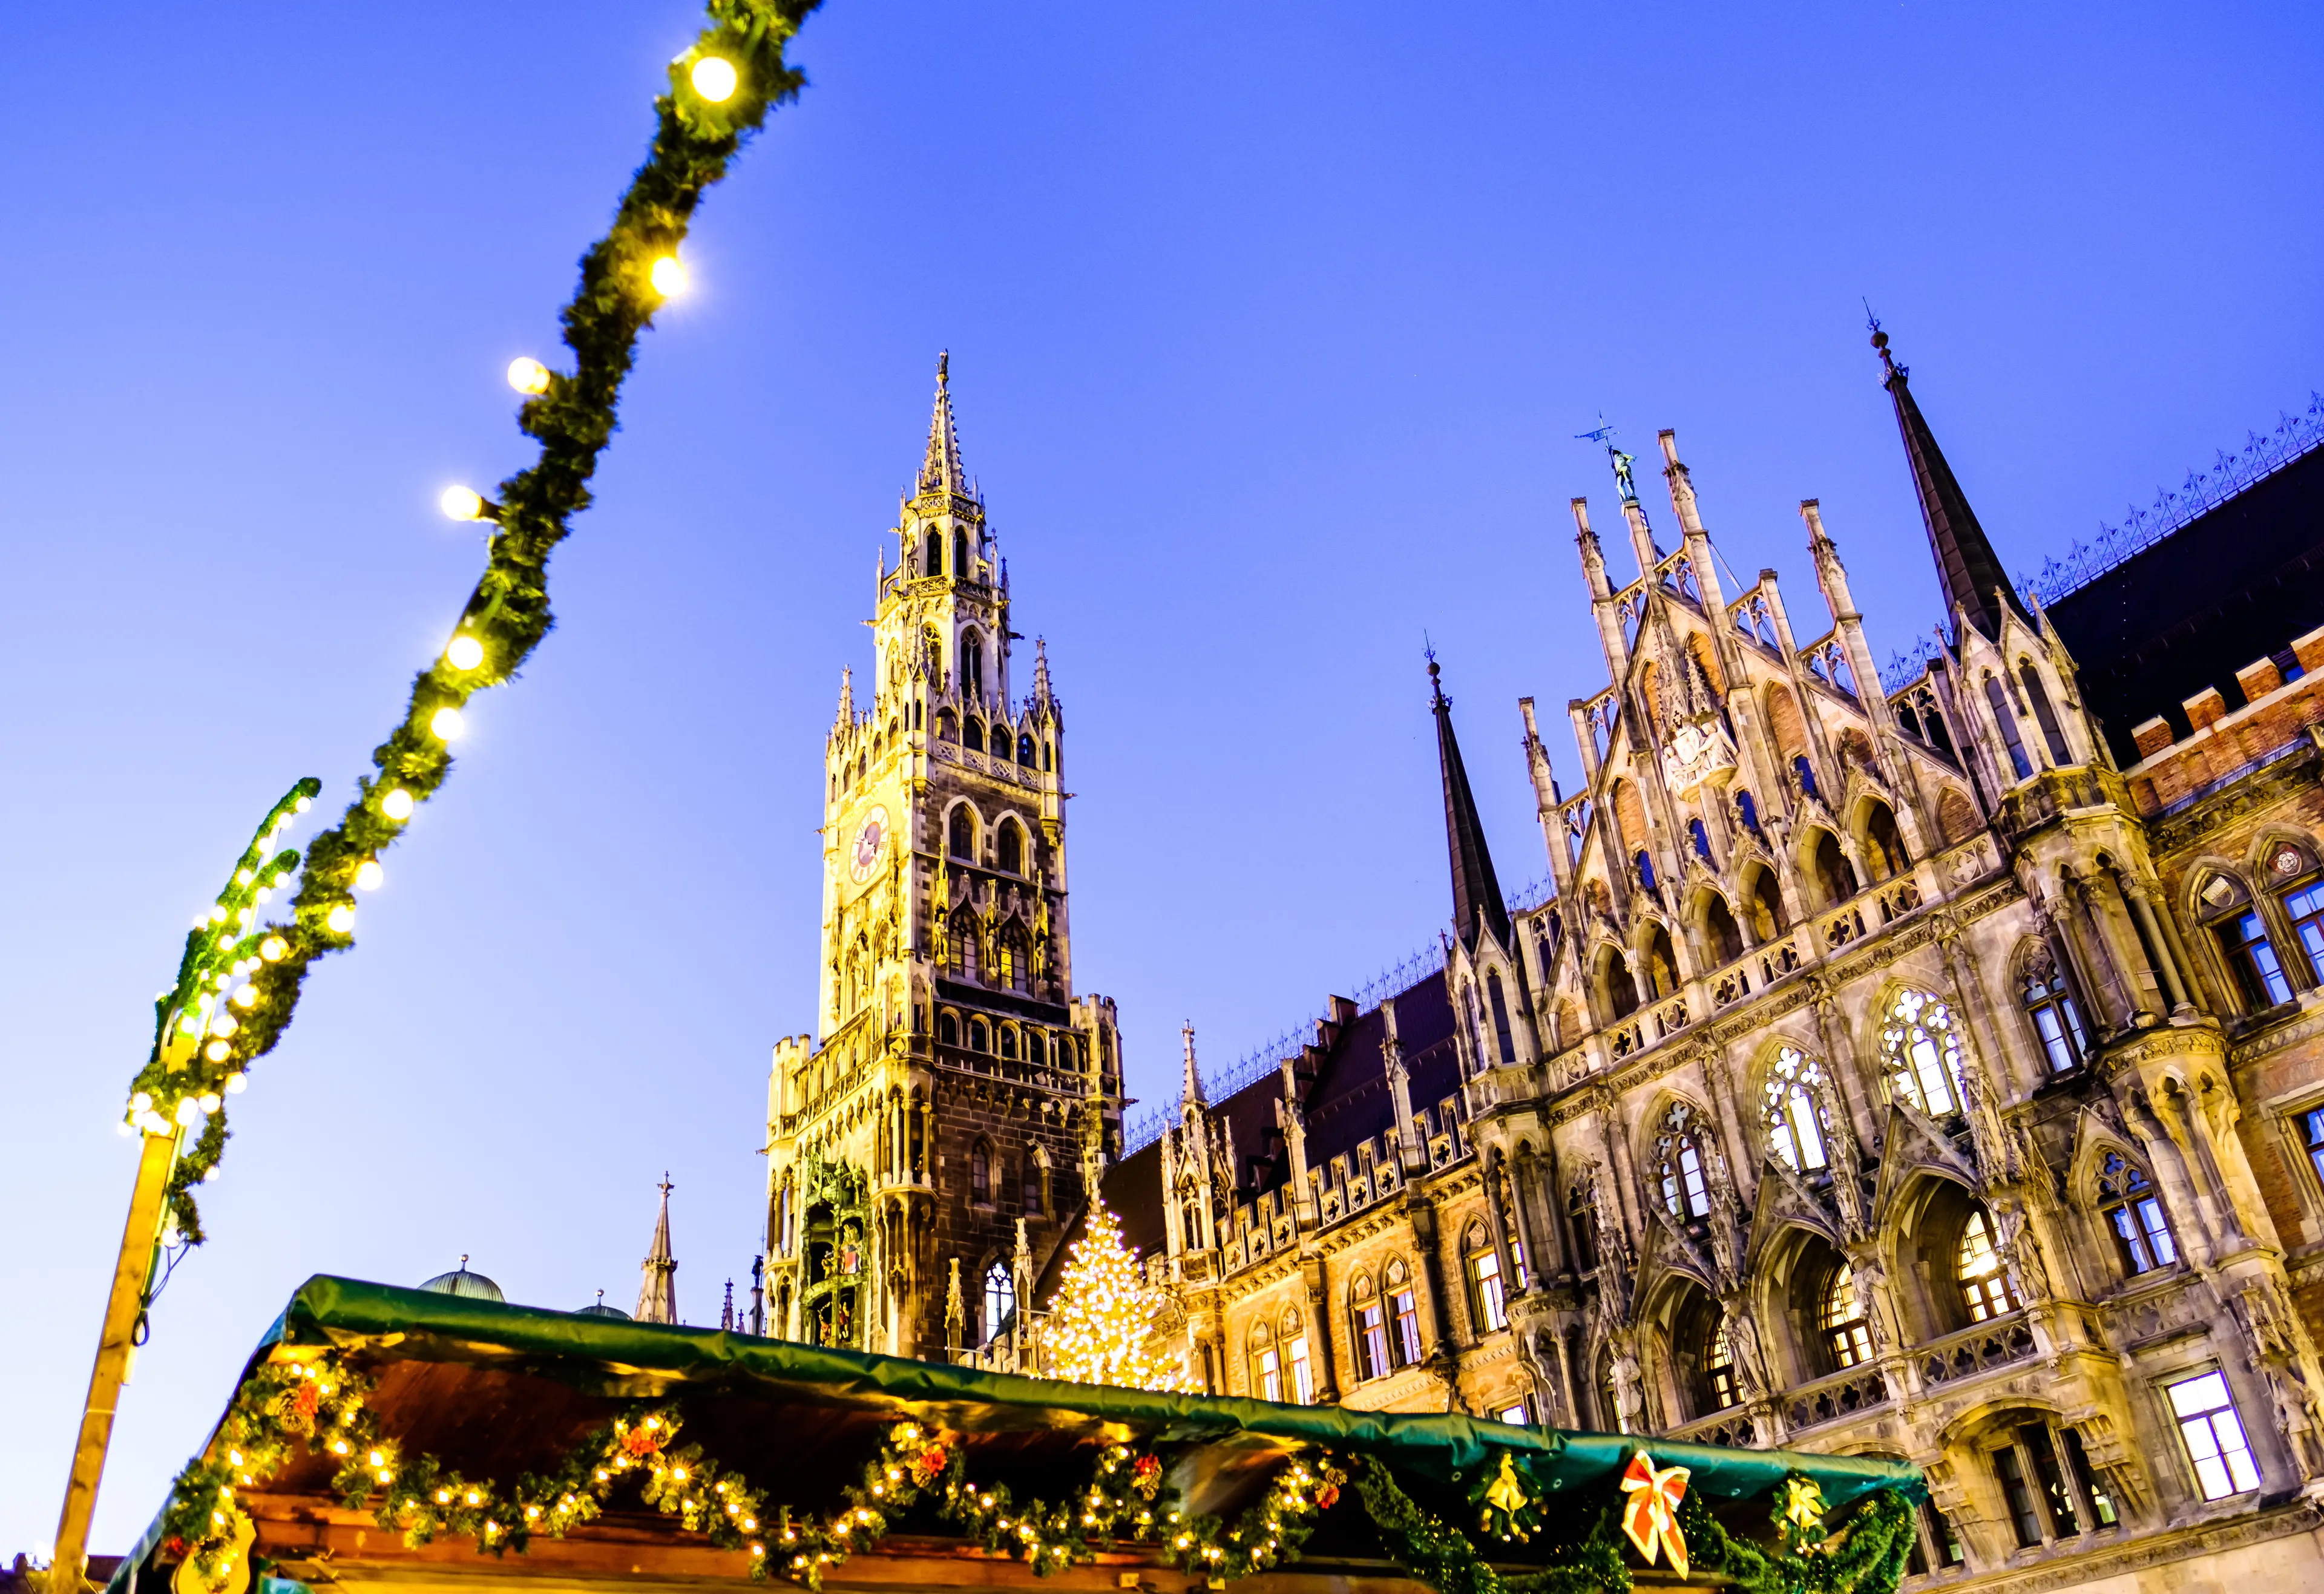 3-Day Romantic Christmas Holiday Itinerary in Munich